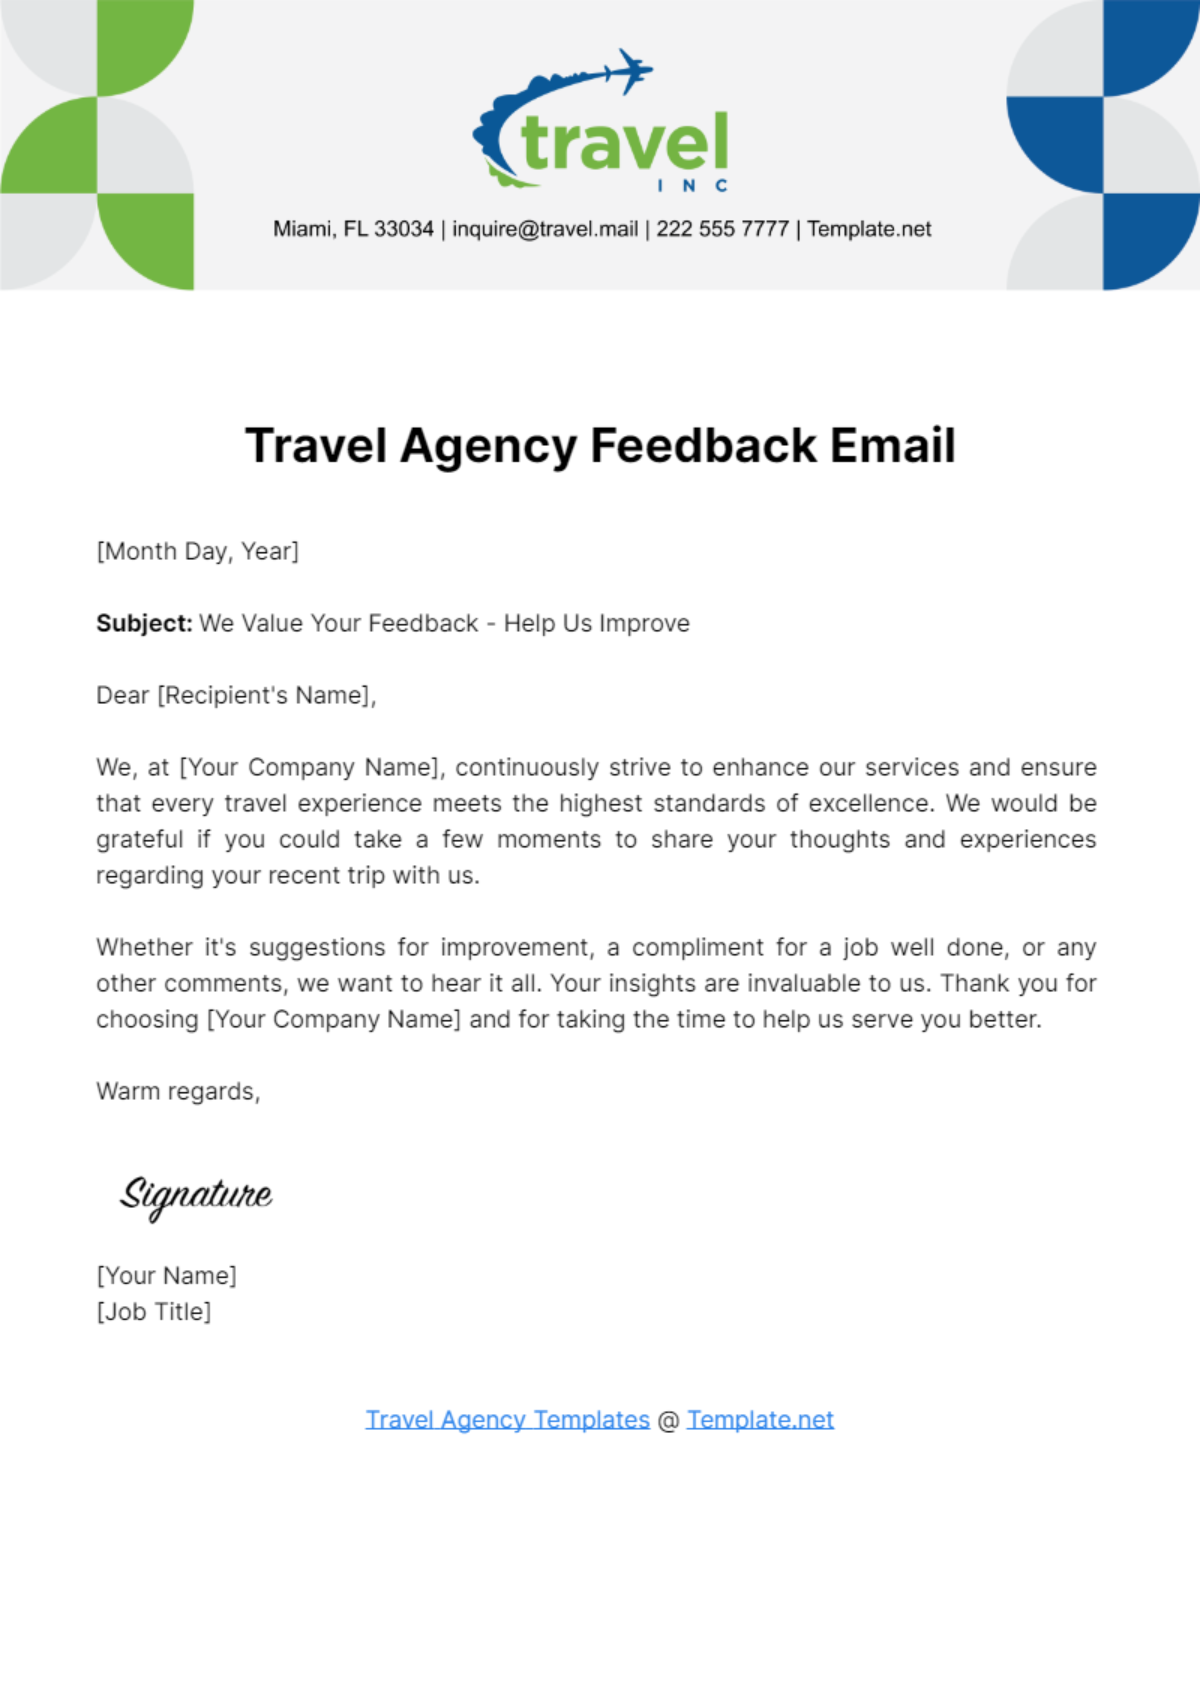 Free Travel Agency Feedback Email Template